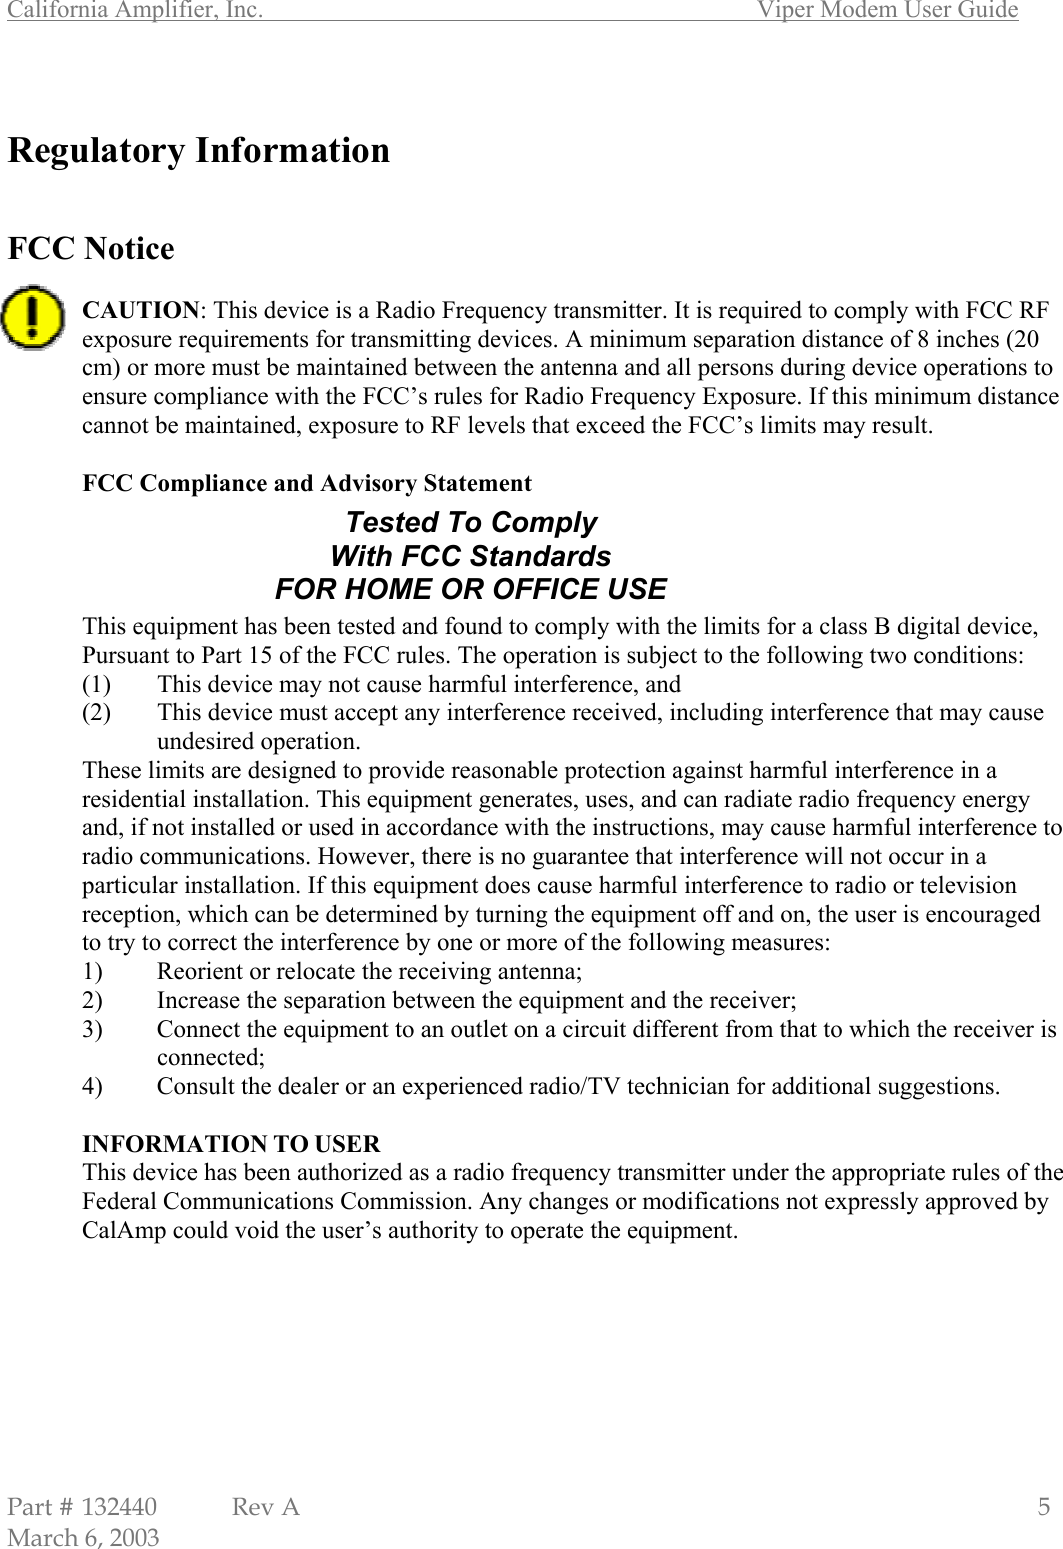 California Amplifier, Inc.       Viper Modem User Guide Part # 132440  Rev A                                                   5 March 6, 2003  Regulatory Information   FCC Notice  CAUTION: This device is a Radio Frequency transmitter. It is required to comply with FCC RF exposure requirements for transmitting devices. A minimum separation distance of 8 inches (20 cm) or more must be maintained between the antenna and all persons during device operations to ensure compliance with the FCC’s rules for Radio Frequency Exposure. If this minimum distance cannot be maintained, exposure to RF levels that exceed the FCC’s limits may result.   FCC Compliance and Advisory Statement       This equipment has been tested and found to comply with the limits for a class B digital device, Pursuant to Part 15 of the FCC rules. The operation is subject to the following two conditions: (1)  This device may not cause harmful interference, and (2)  This device must accept any interference received, including interference that may cause undesired operation. These limits are designed to provide reasonable protection against harmful interference in a residential installation. This equipment generates, uses, and can radiate radio frequency energy and, if not installed or used in accordance with the instructions, may cause harmful interference to radio communications. However, there is no guarantee that interference will not occur in a particular installation. If this equipment does cause harmful interference to radio or television reception, which can be determined by turning the equipment off and on, the user is encouraged to try to correct the interference by one or more of the following measures: 1)  Reorient or relocate the receiving antenna; 2)  Increase the separation between the equipment and the receiver; 3)  Connect the equipment to an outlet on a circuit different from that to which the receiver is connected; 4)  Consult the dealer or an experienced radio/TV technician for additional suggestions.  INFORMATION TO USER This device has been authorized as a radio frequency transmitter under the appropriate rules of the Federal Communications Commission. Any changes or modifications not expressly approved by CalAmp could void the user’s authority to operate the equipment. Tested To Comply With FCC Standards FOR HOME OR OFFICE USE